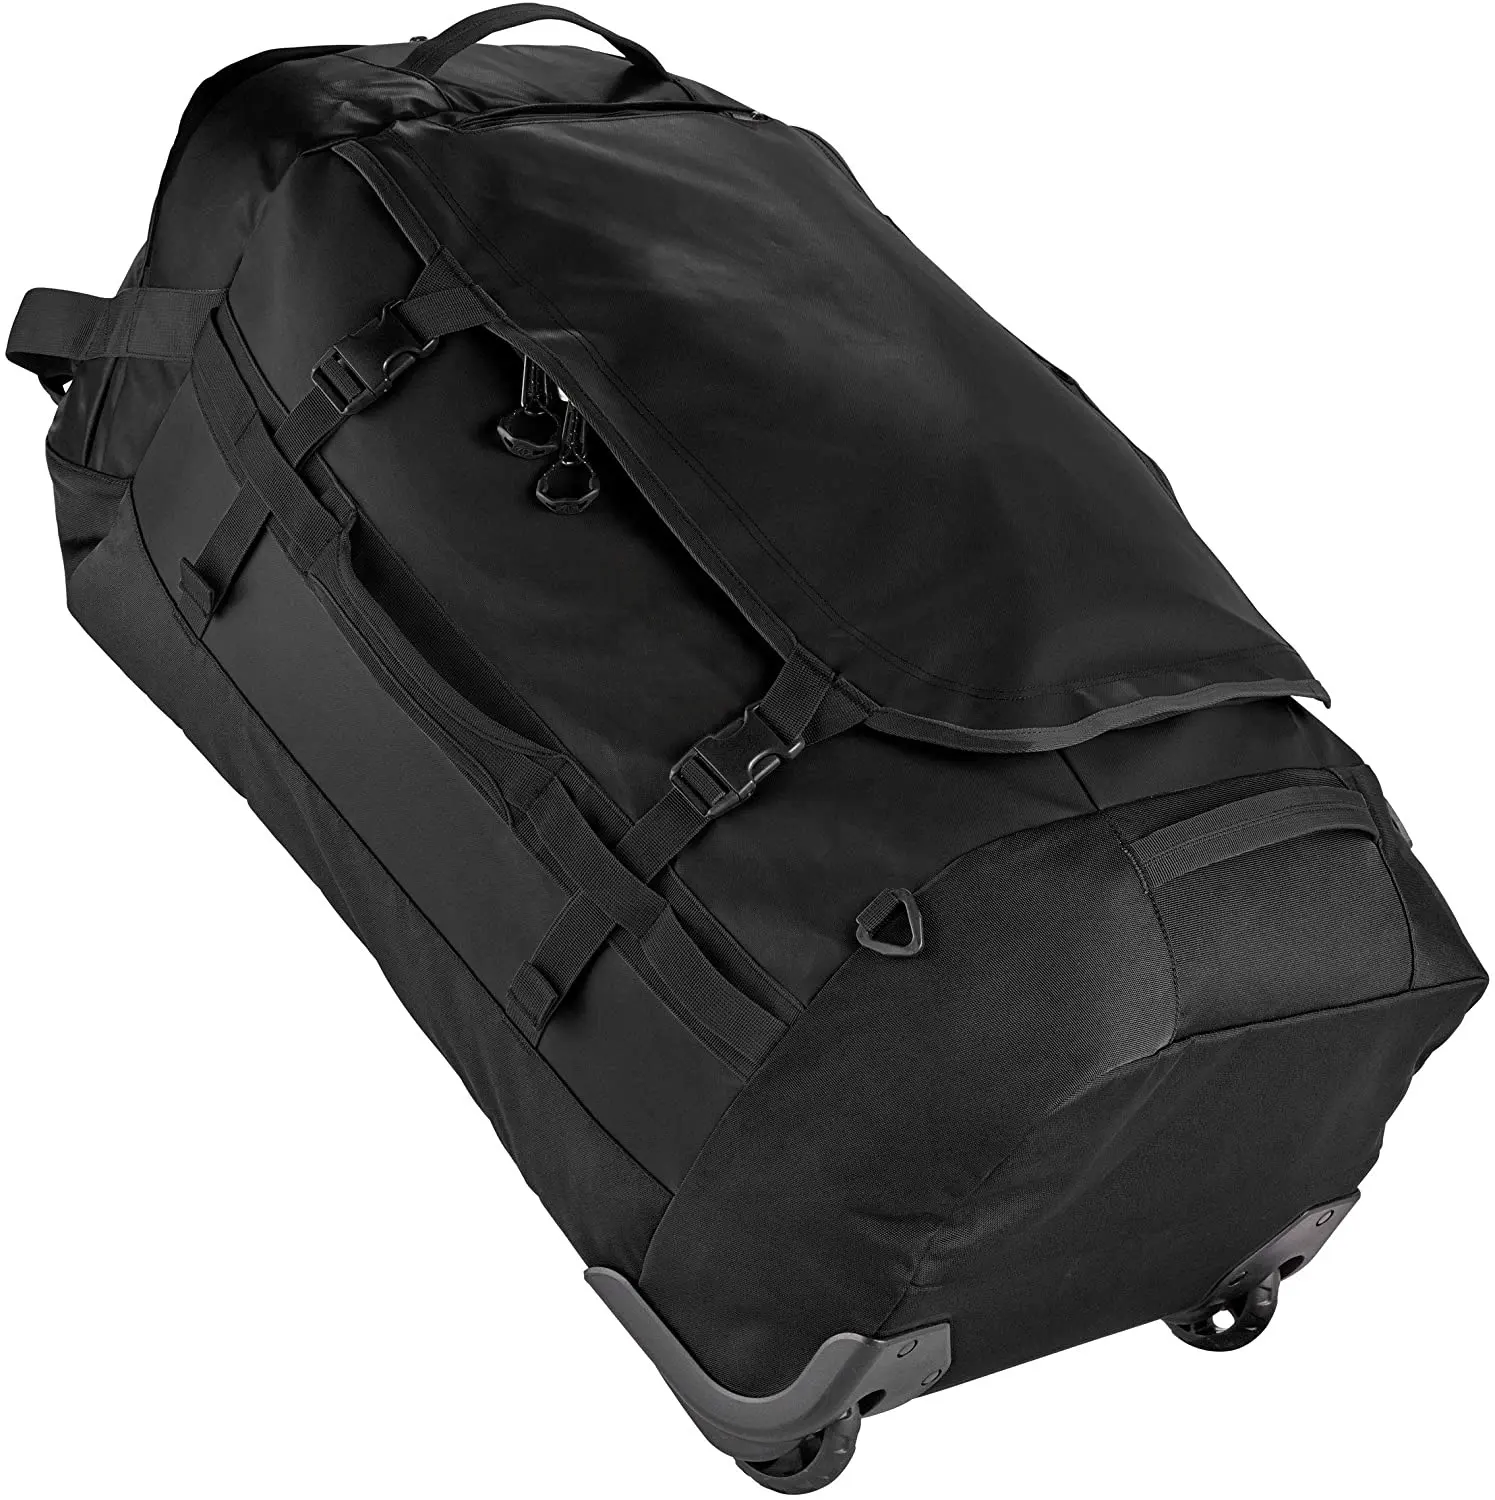 Large Capacity Reinforced Roller Gear trolley bag with shoulder foldable Rolling Duffel bags traveling duffle bag with wheel